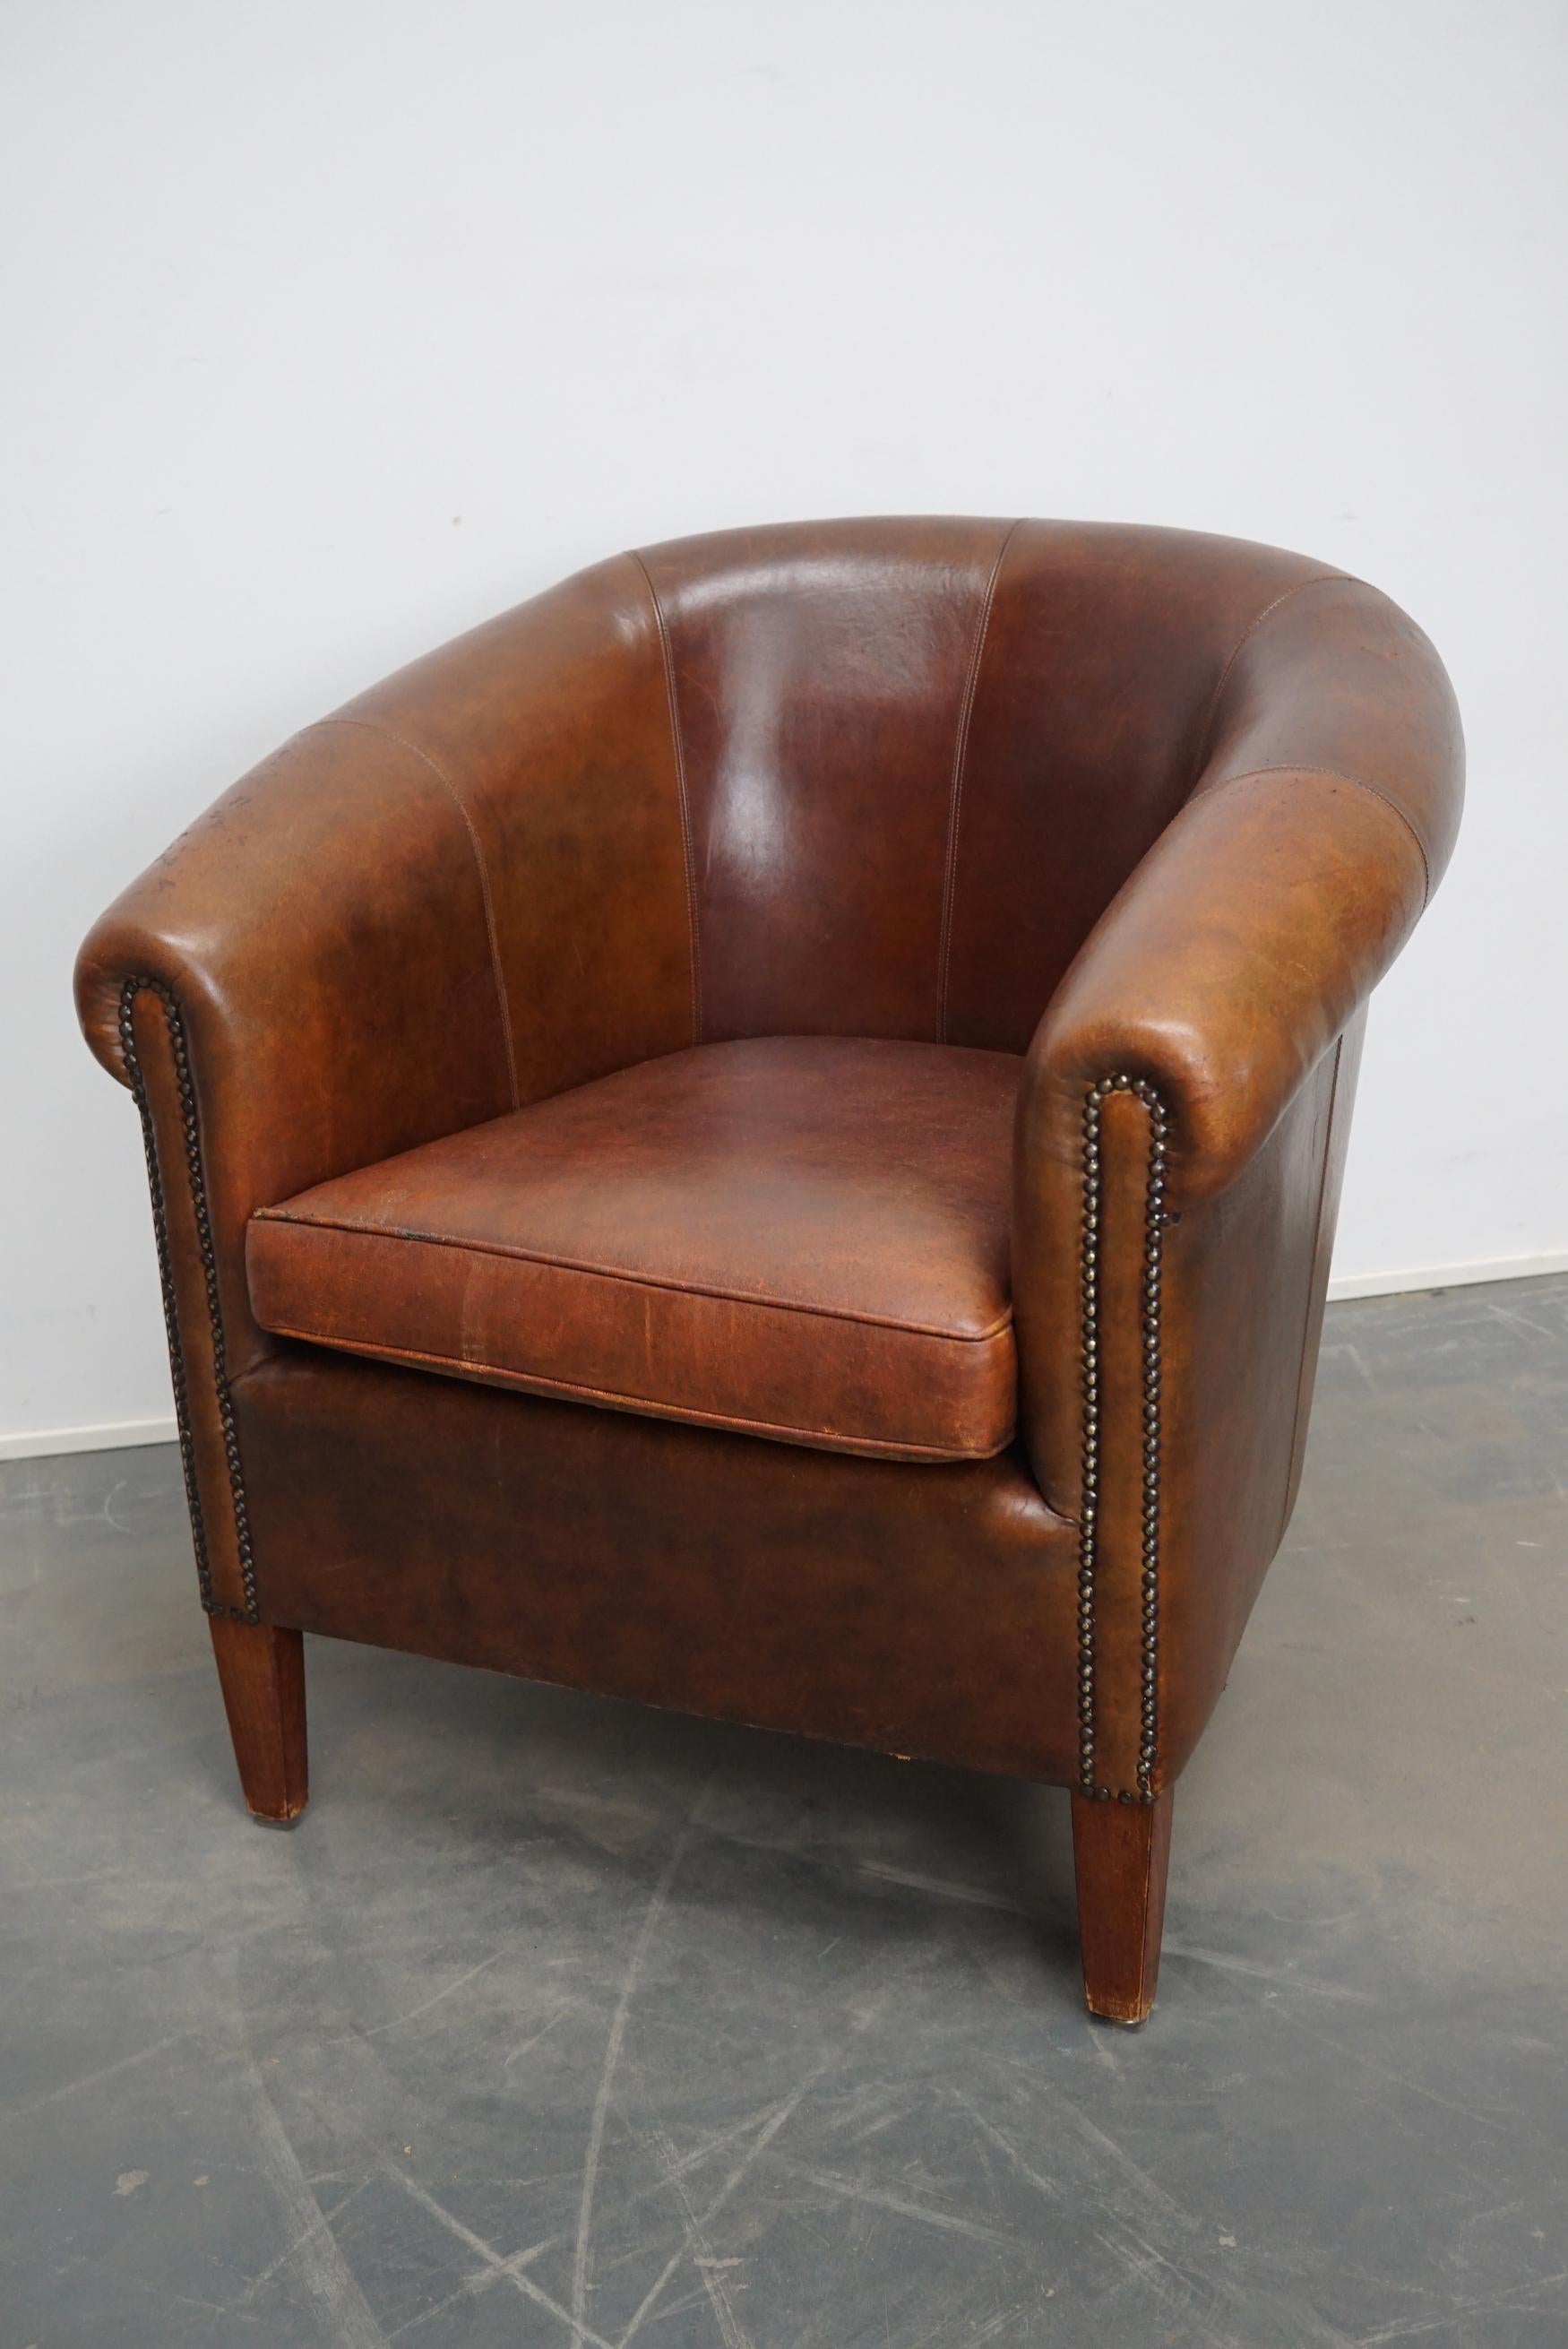 This vintage club chair is upholstered with cognac-colored leather and features metal rivets and wooden legs.
 
 